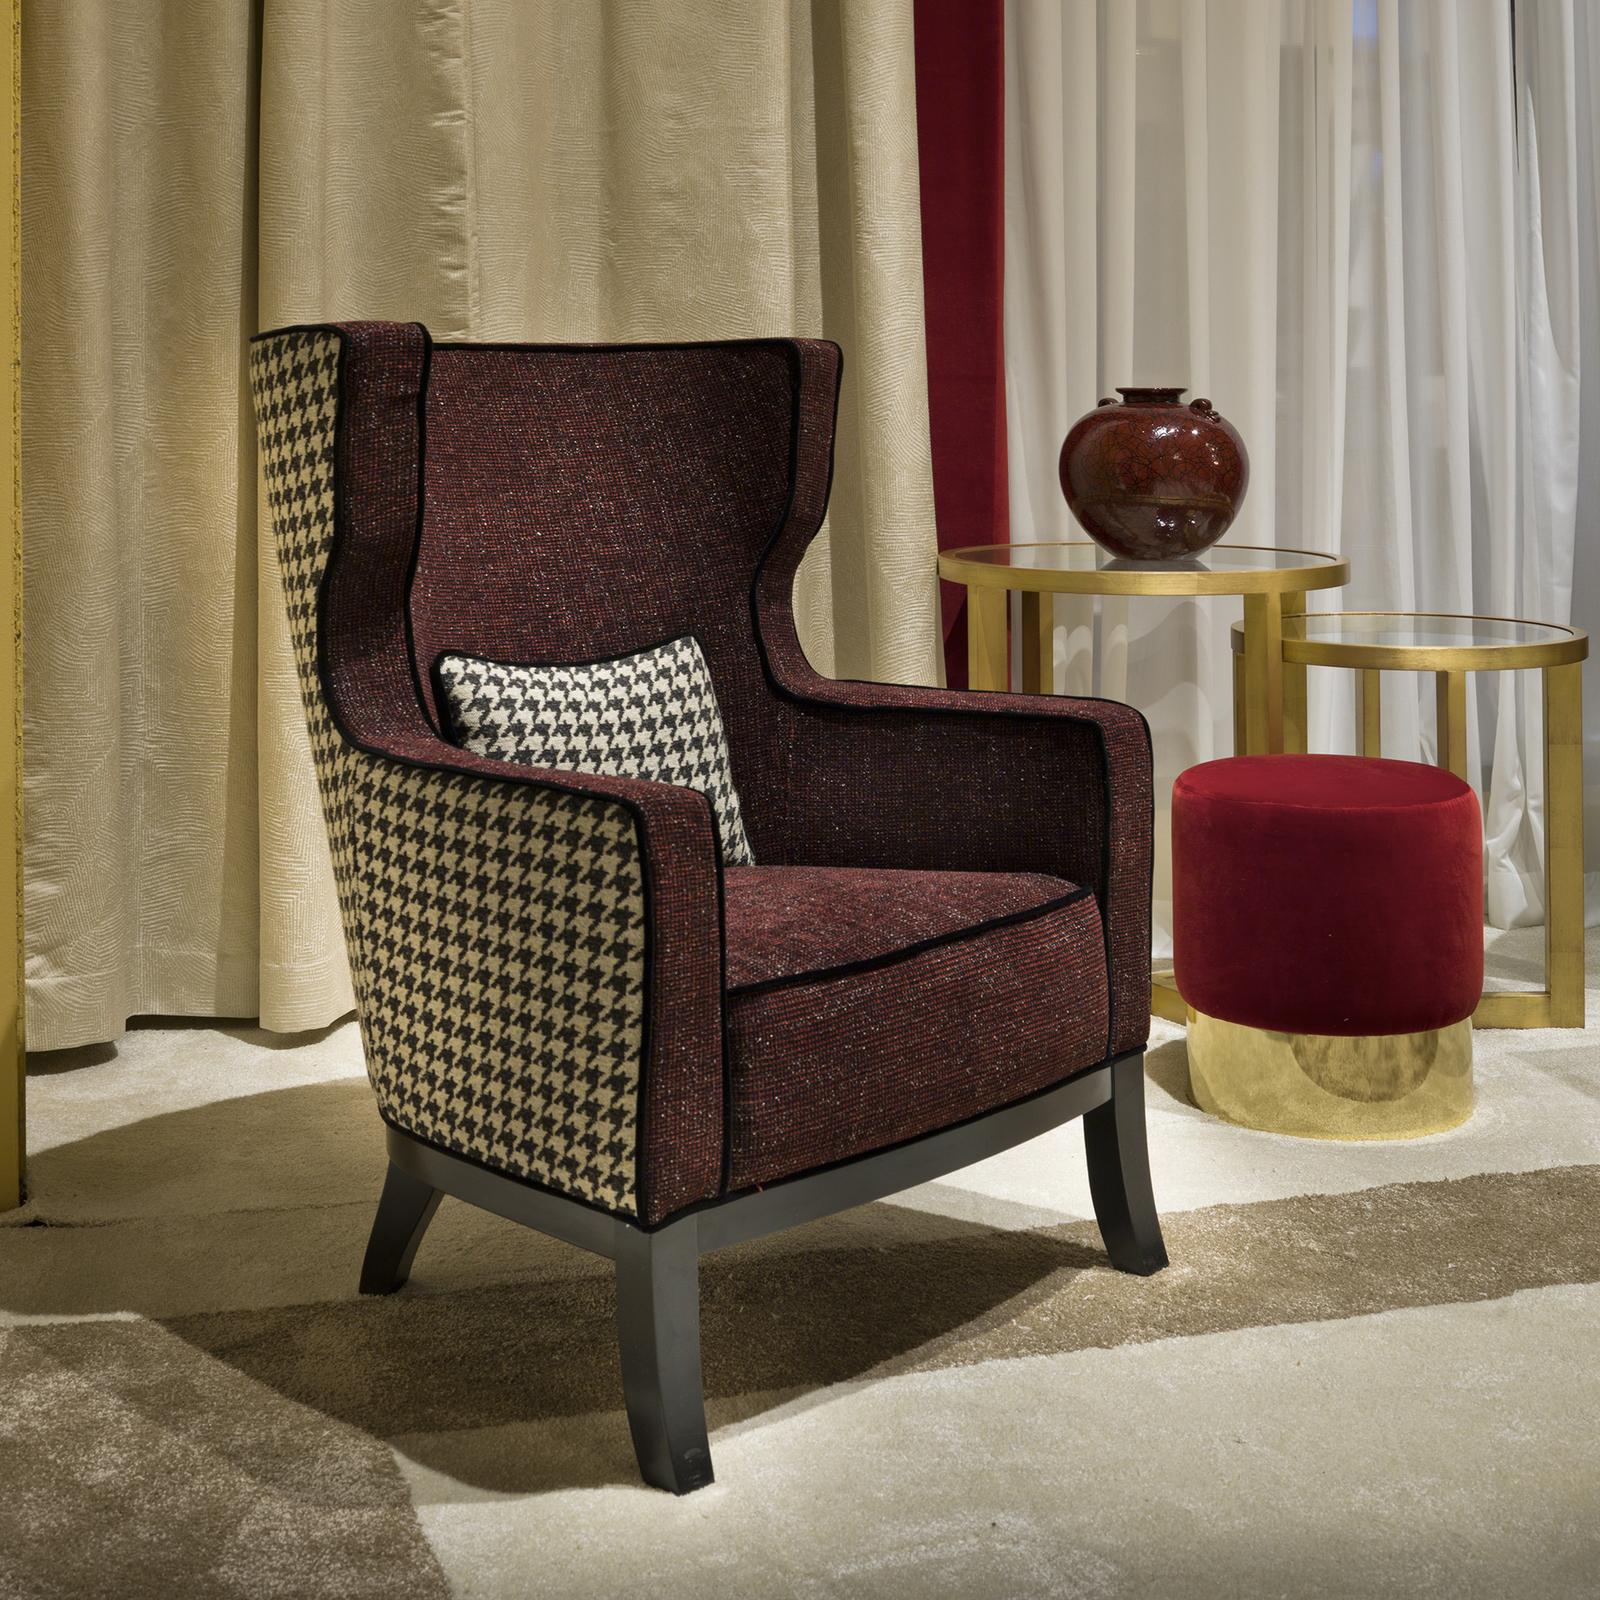 A striking piece of functional decor that will be equally at ease by a bookcase in a study or in the middle of a living room to show off the unique combination of two different cotton covers, this armchair is both comfortable and elegant. The solid